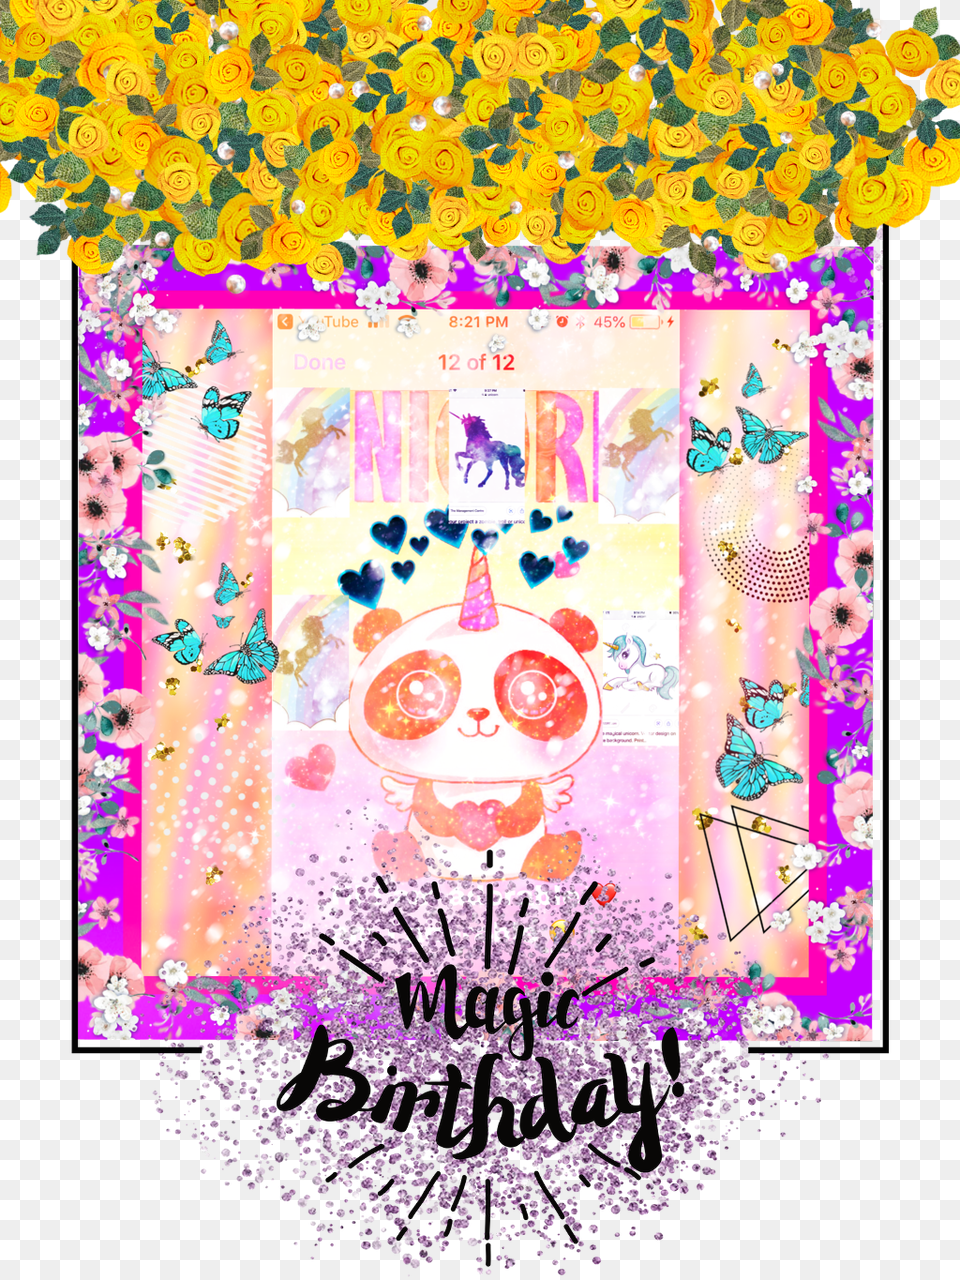 Creative Art Frame For Friends Birthday Poster, Envelope, Greeting Card, Mail, Collage Png